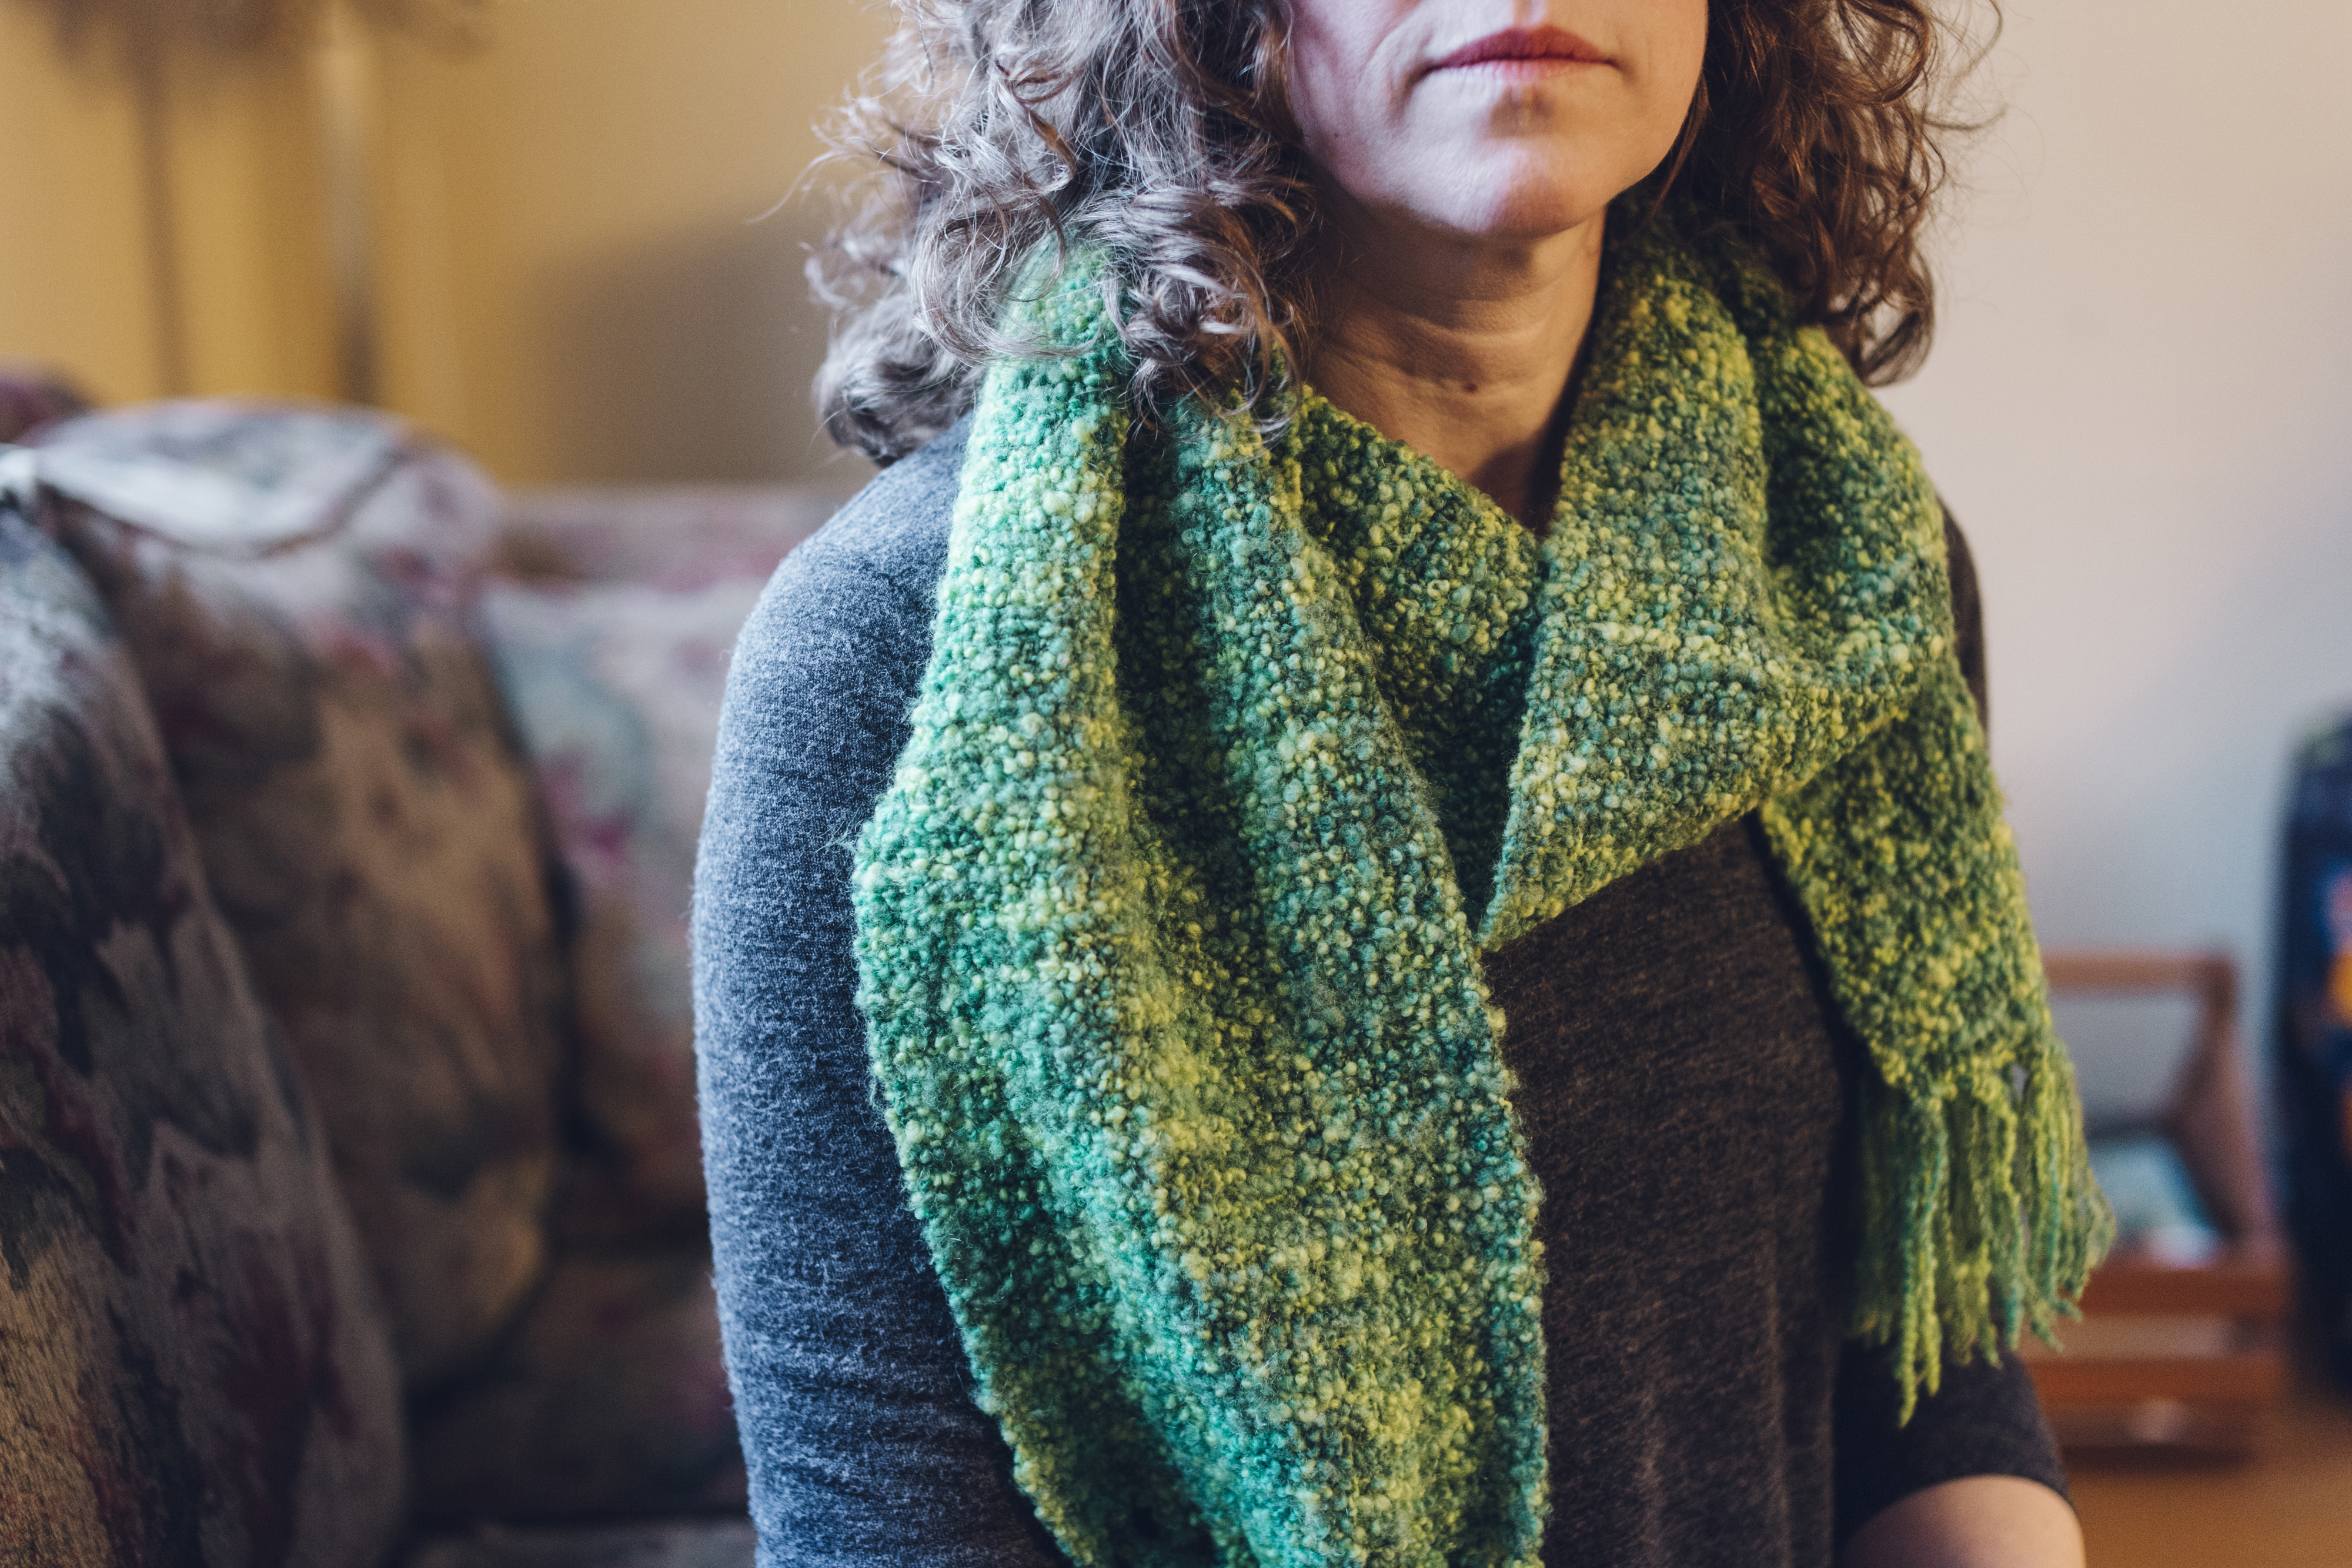 Laura Alary wears the scarf that helped spark her gratefulness.